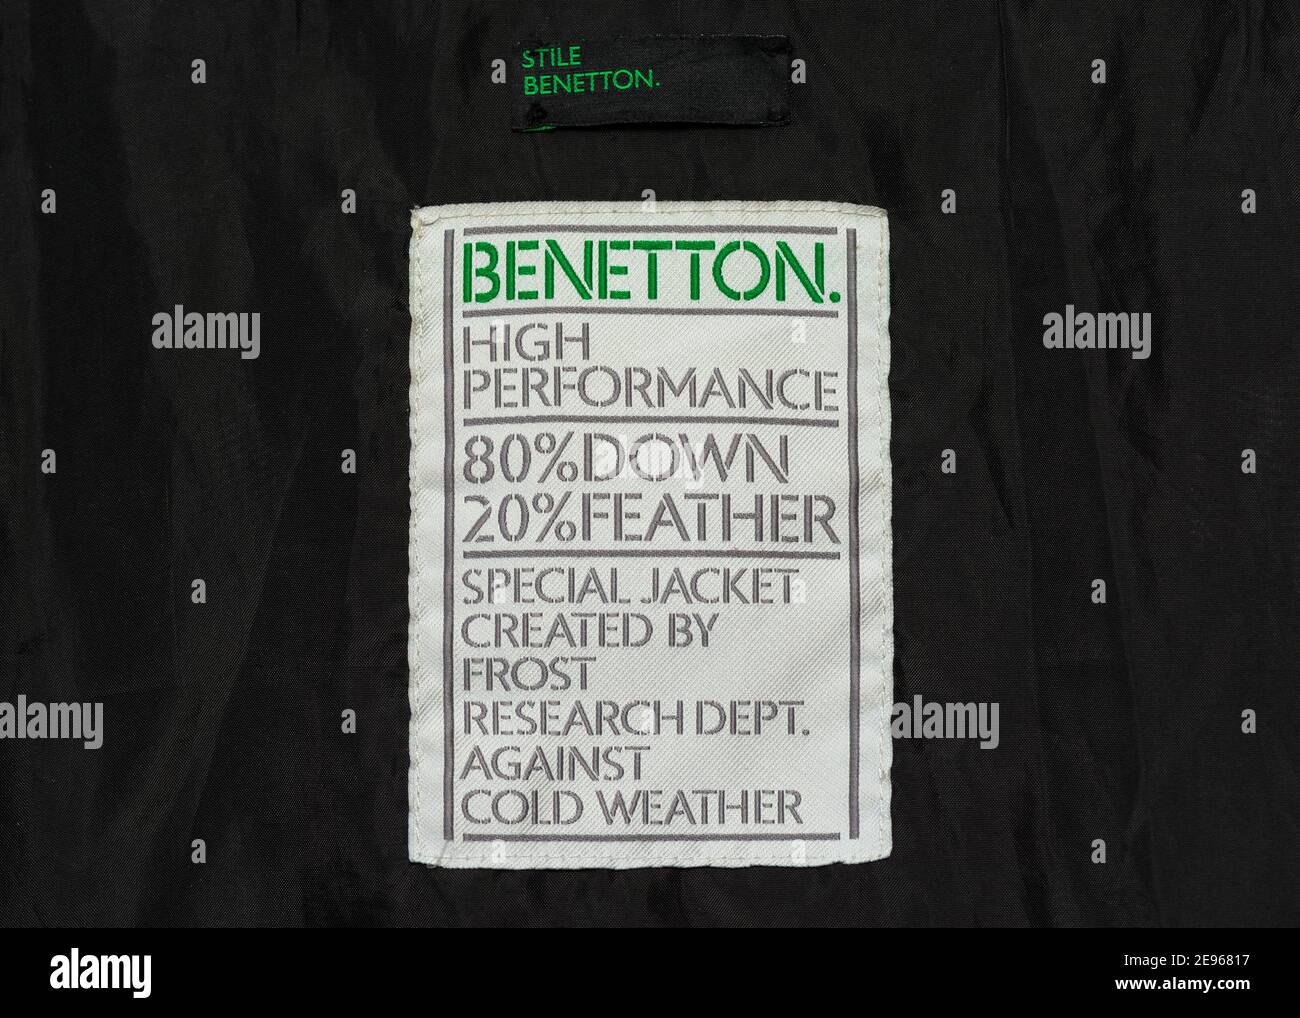 Benetton high performance down and feather special jacket label by United  Colors of Benetton brand Stock Photo - Alamy